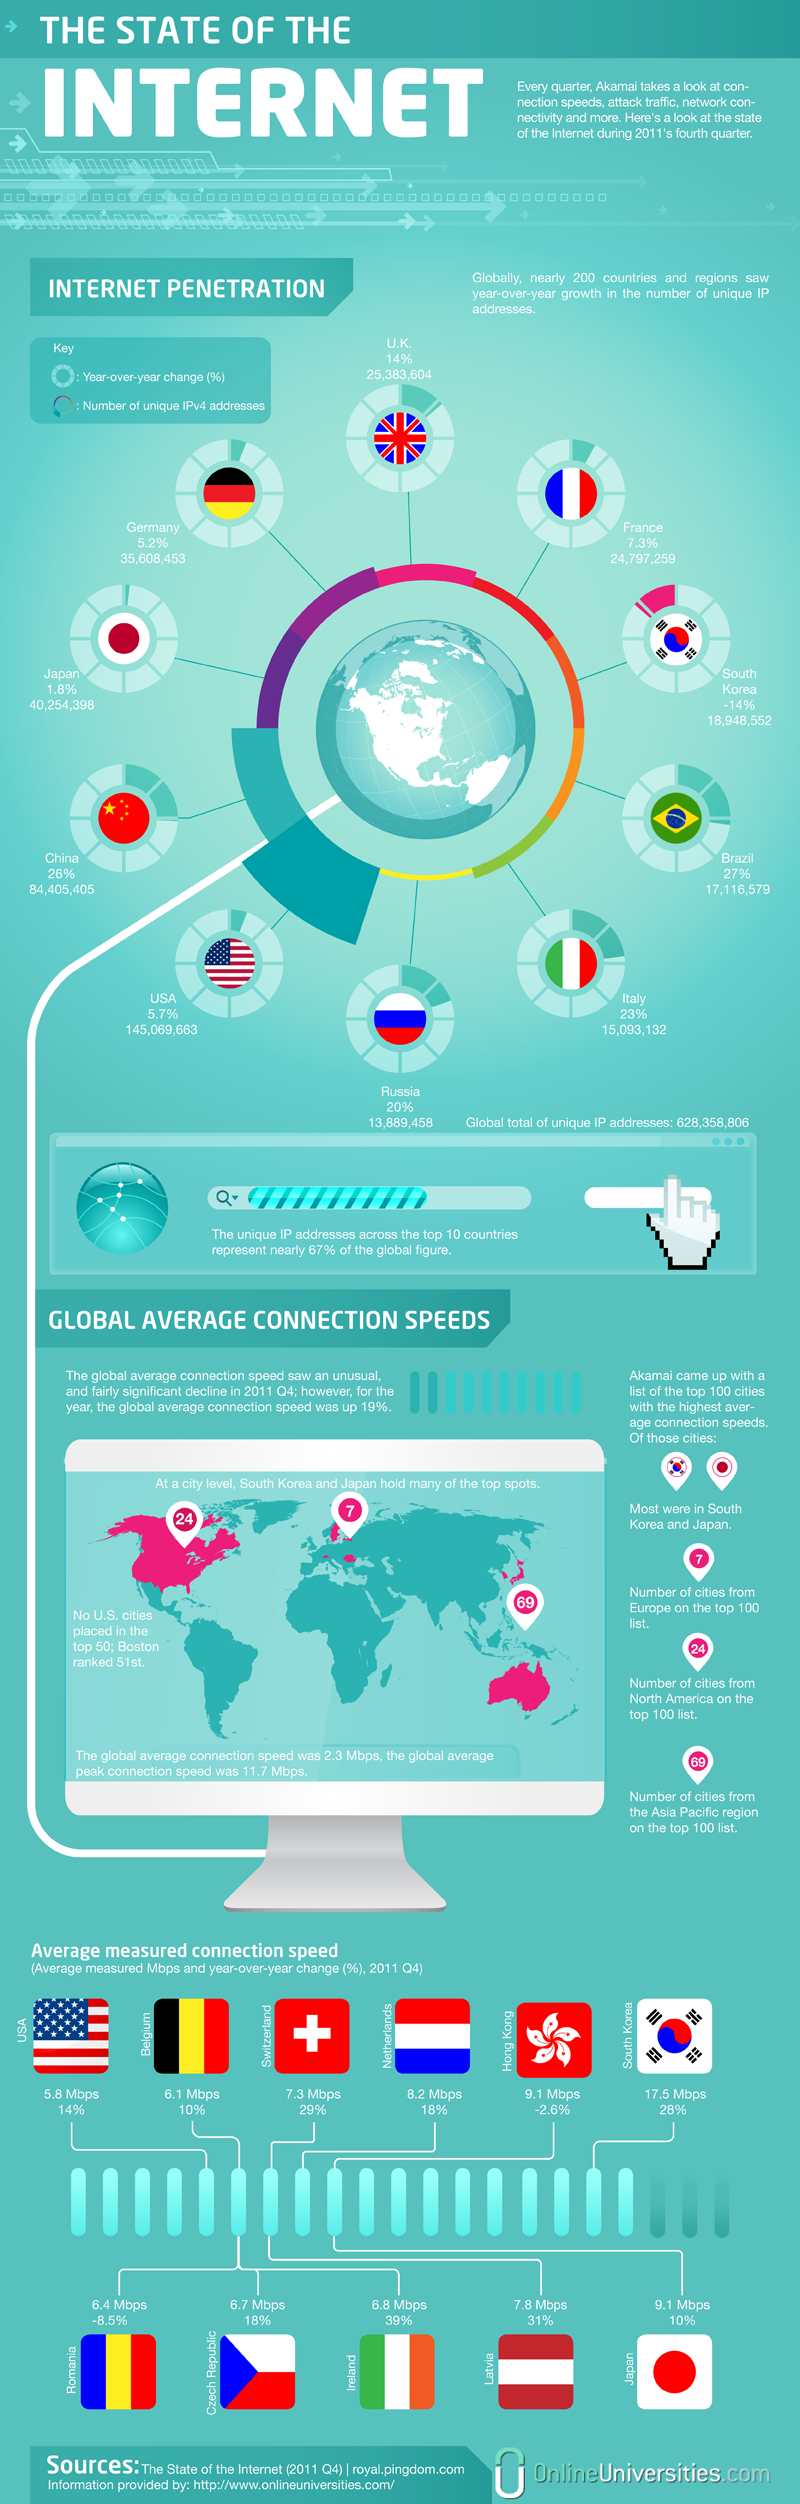 Infographic: What Is The Current State Of The Internet?